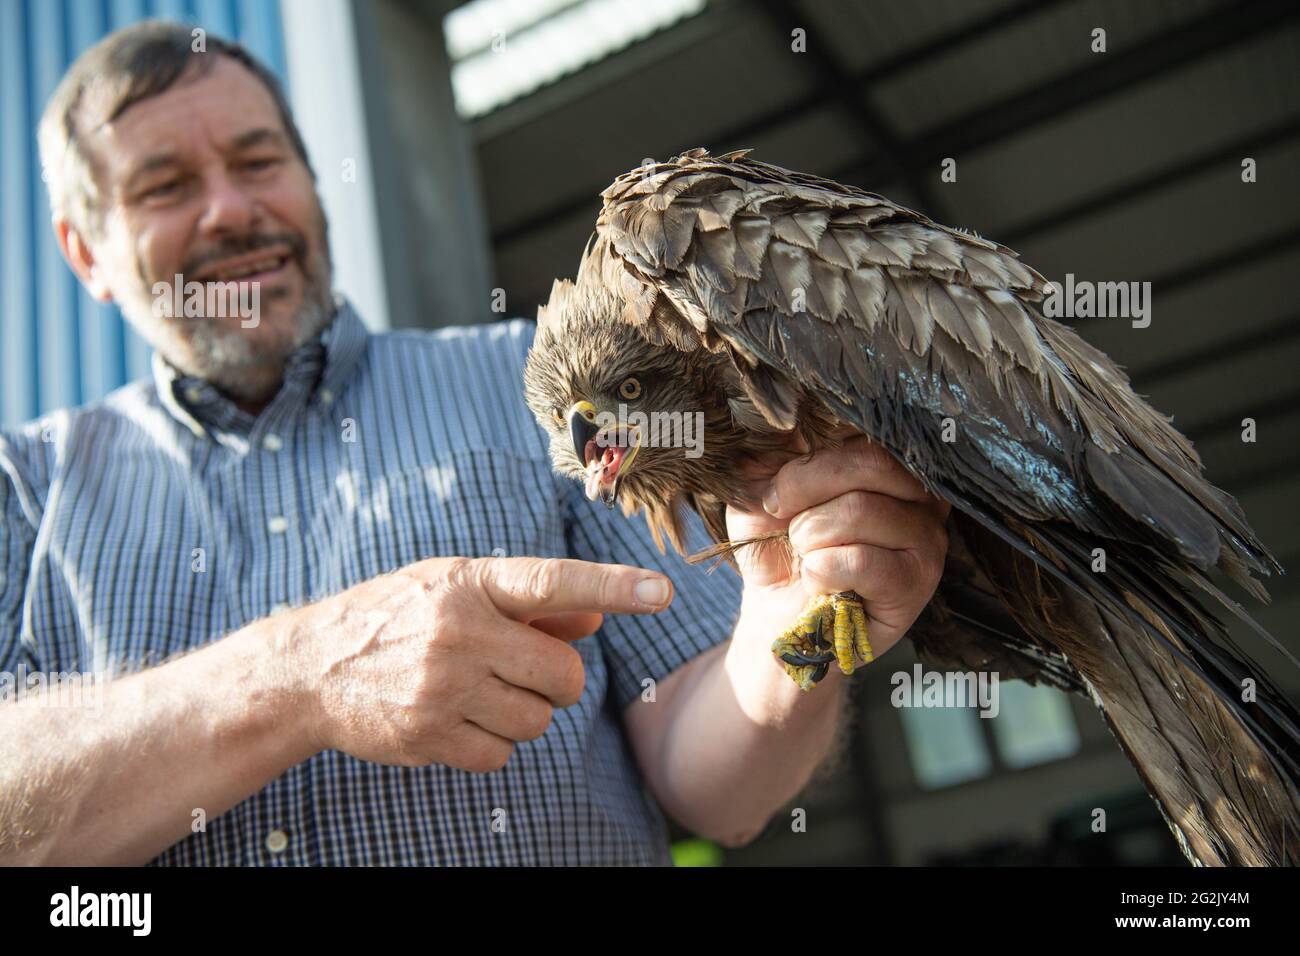 Wiesbaden, Germany. 12th June, 2021. The bird ringers and ornithologist Reinhard Vohwinkel caught a black kite at the landfill site in Wiesbaden in order to ring it afterwards. A large colony of birds of prey lives on the huge site. (to dpa 'Lunchtime in the garbage: Black kites dine in the landfill') Credit: Boris Roessler/dpa/Alamy Live News Stock Photo